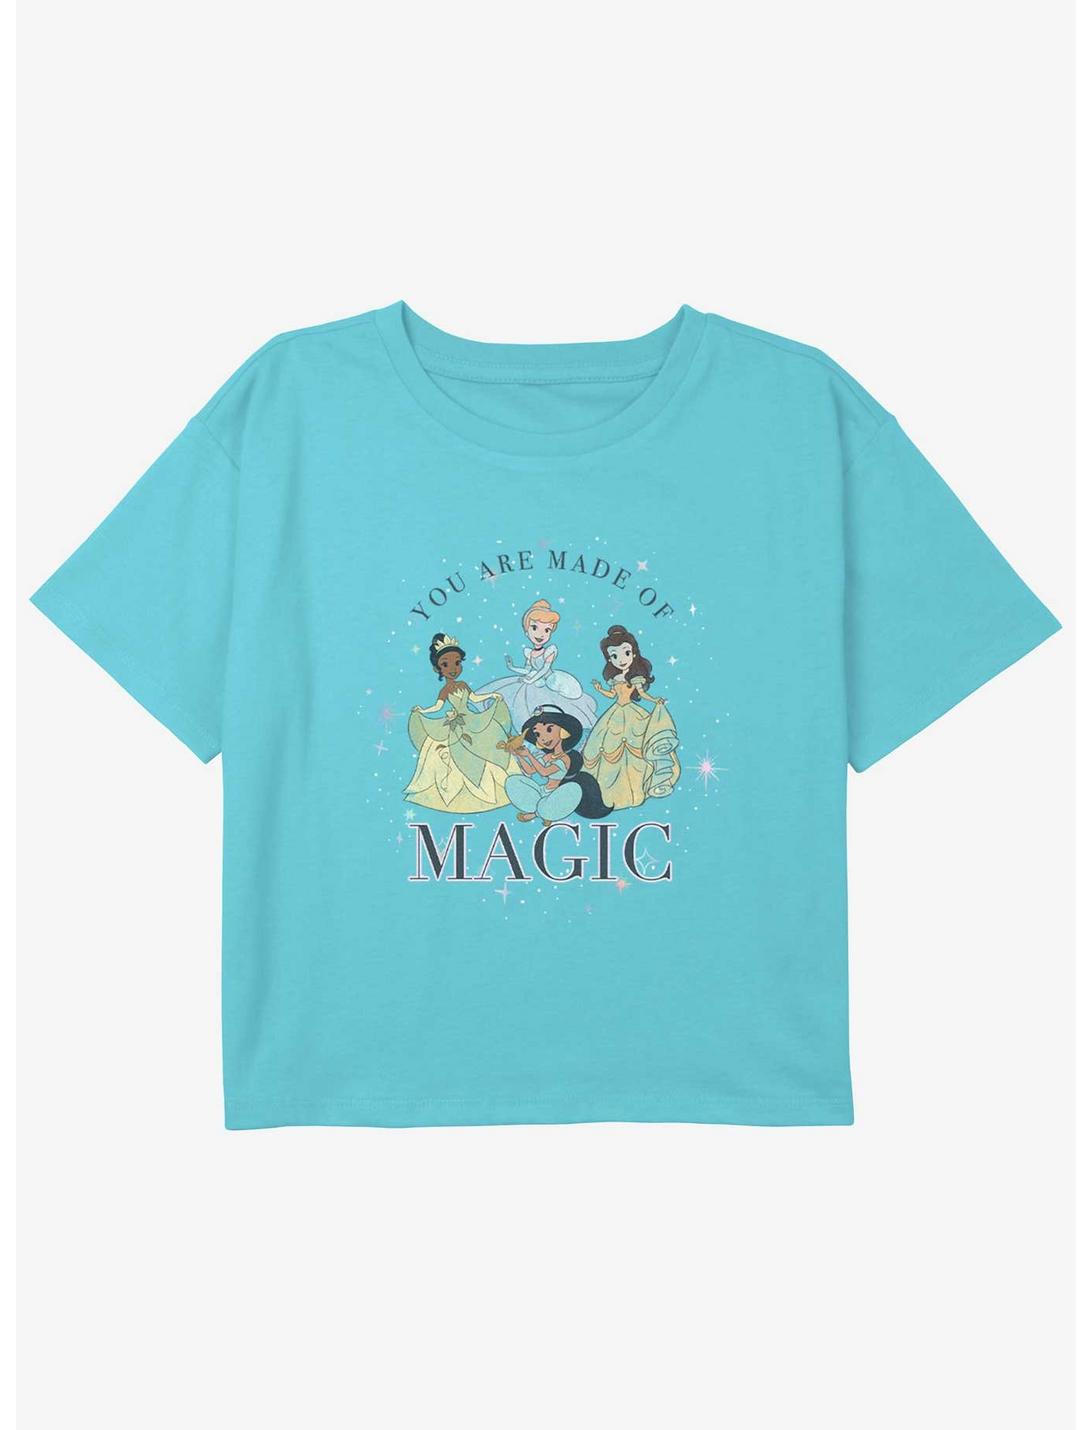 Disney The Princess and the Frog Made Of Magic Girls Youth Crop T-Shirt, BLUE, hi-res